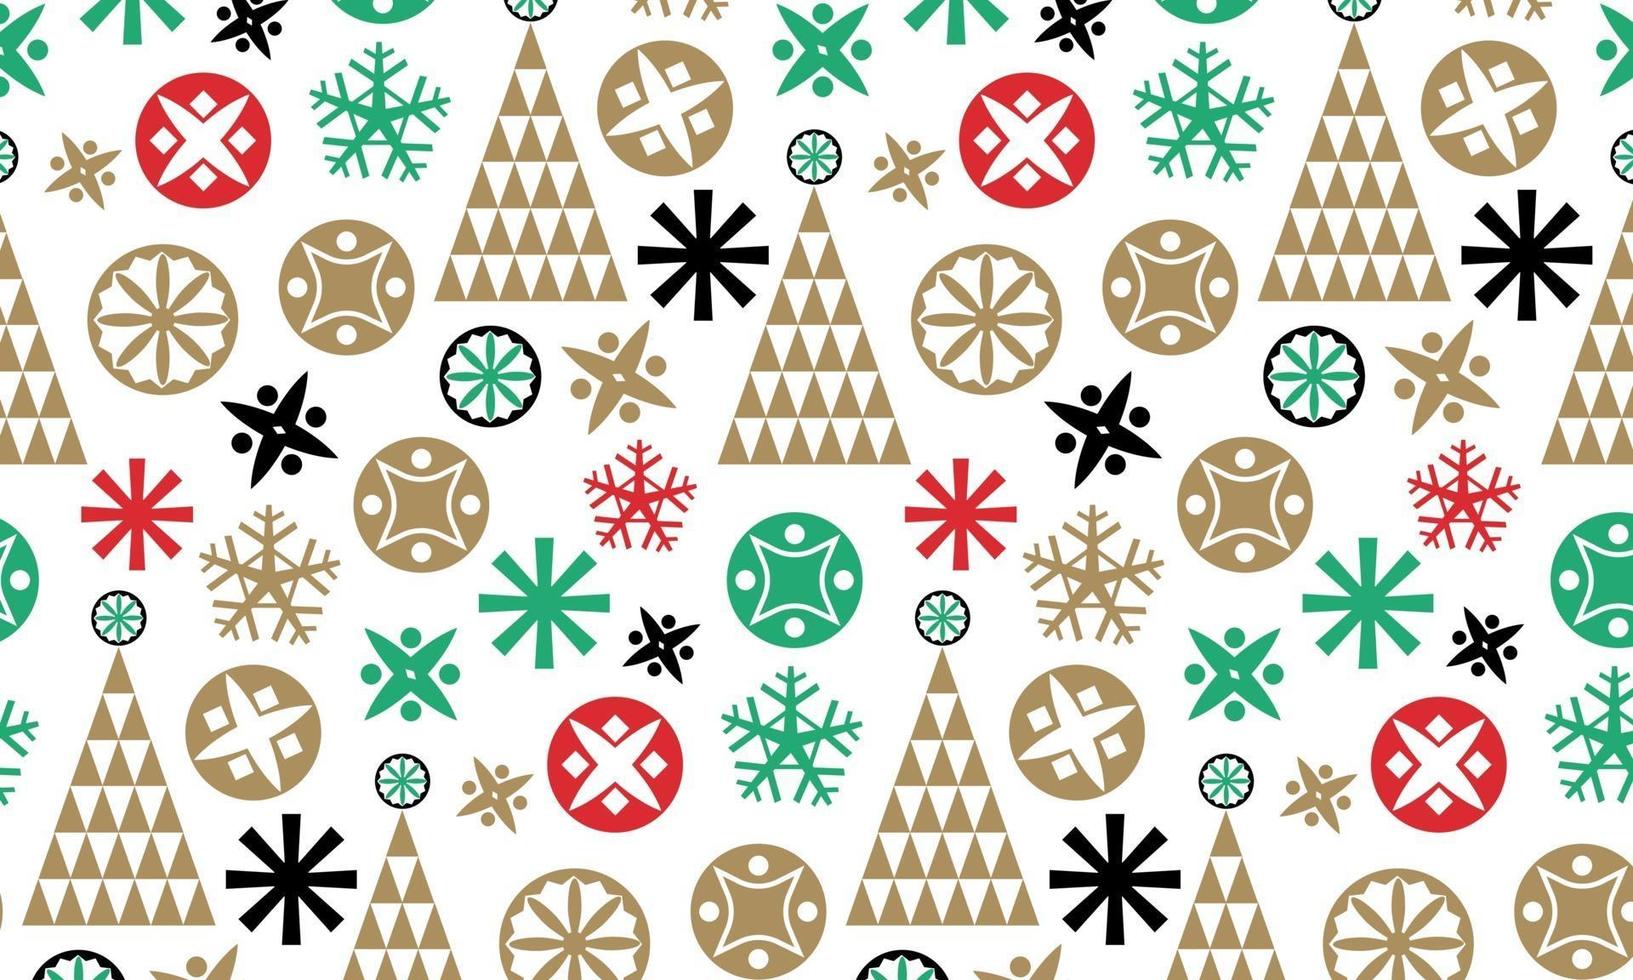 Christmas element pattern background vector